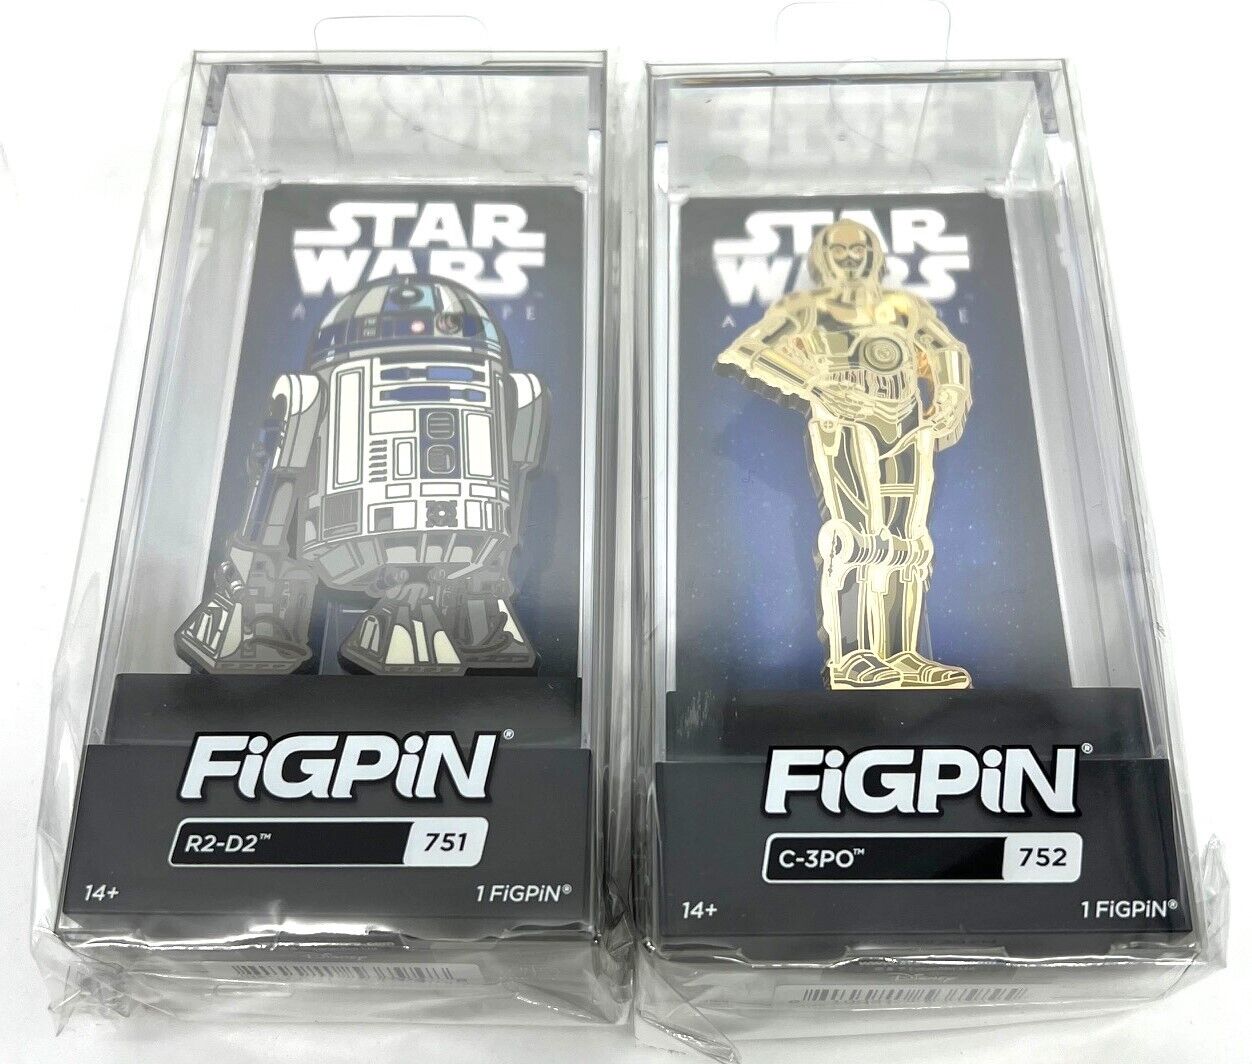 FiGPiN Star Wars A New Hope R2-D2 #751 & C-3PO #752 Set of 2 Collectable Pins